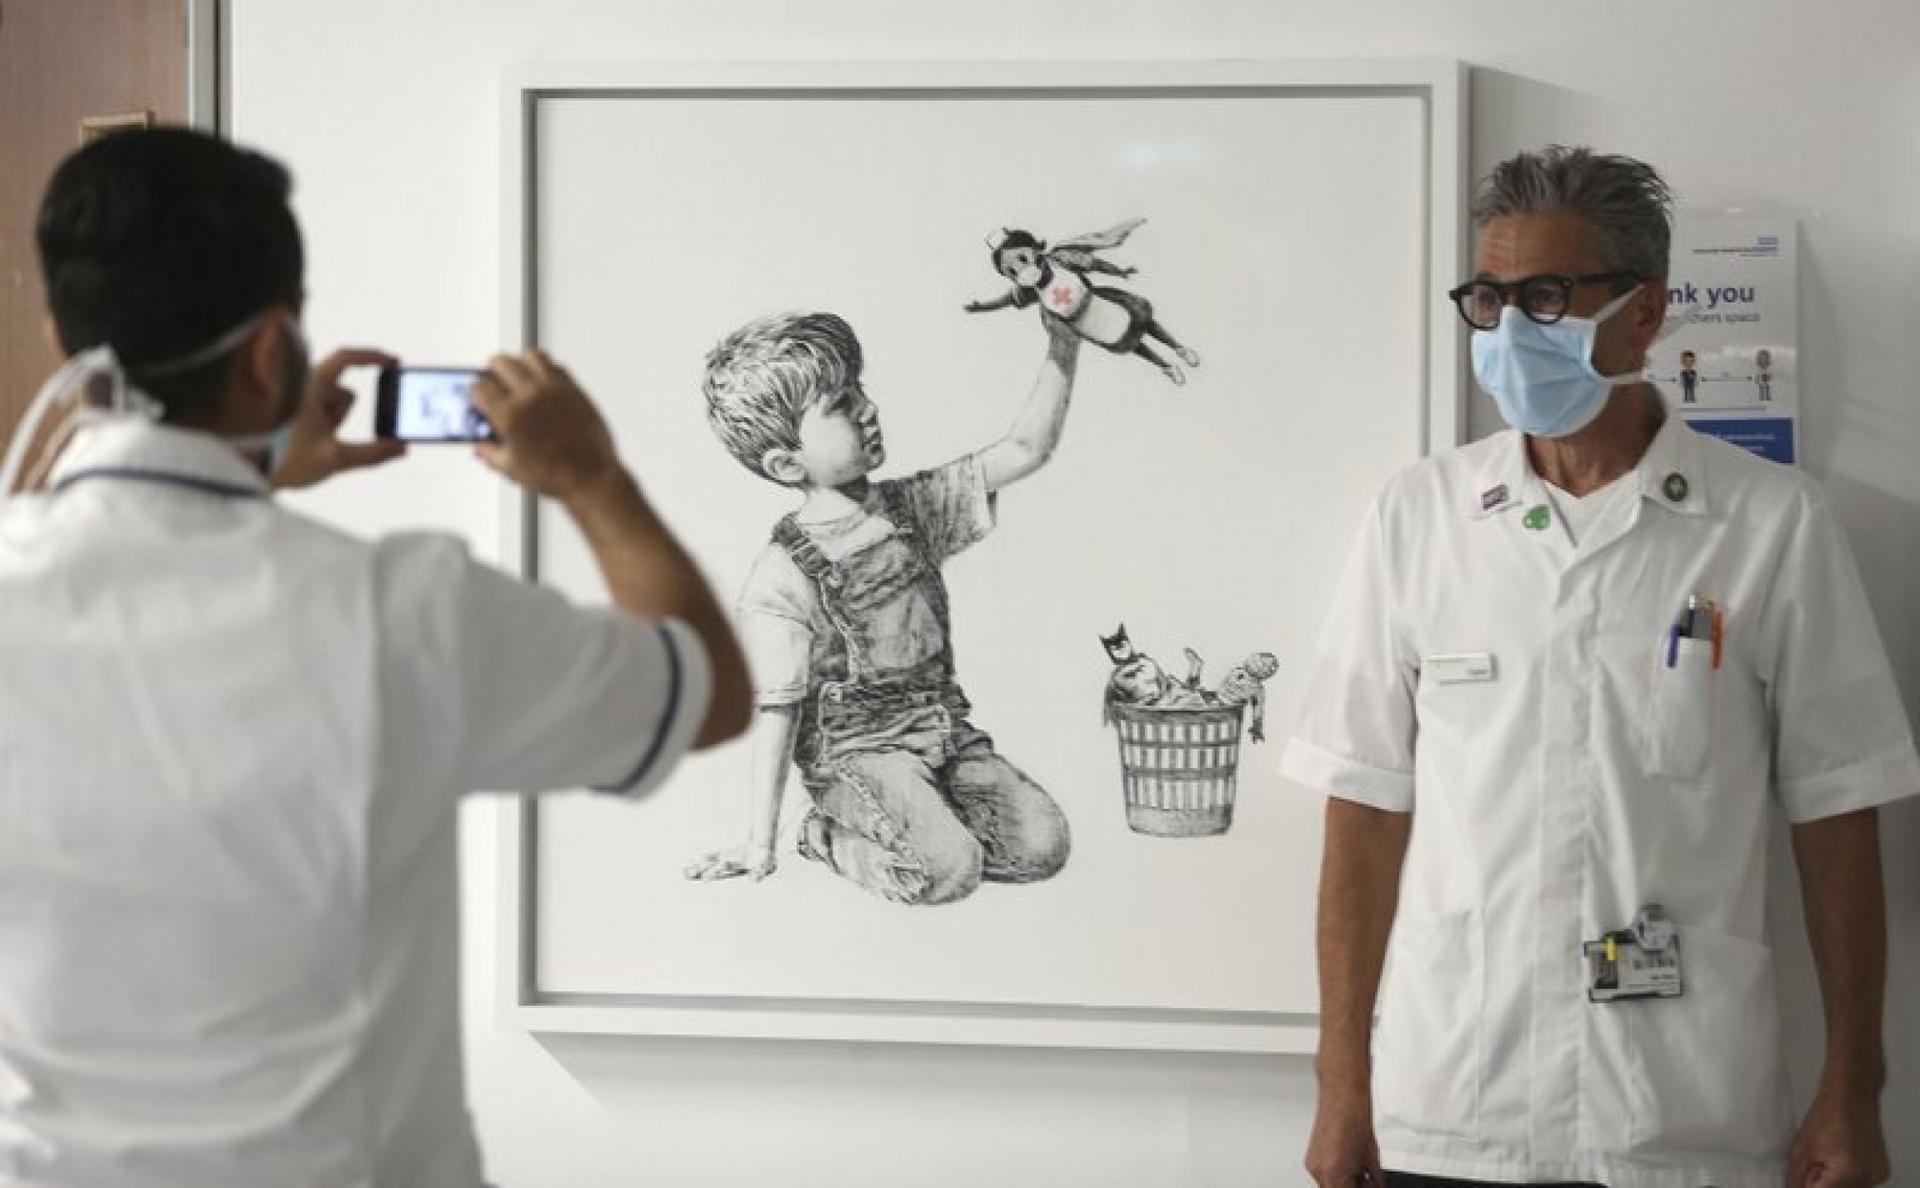 A member of a hospital staff is shown standing next to a Banksy artwork while getting their photograph taken.